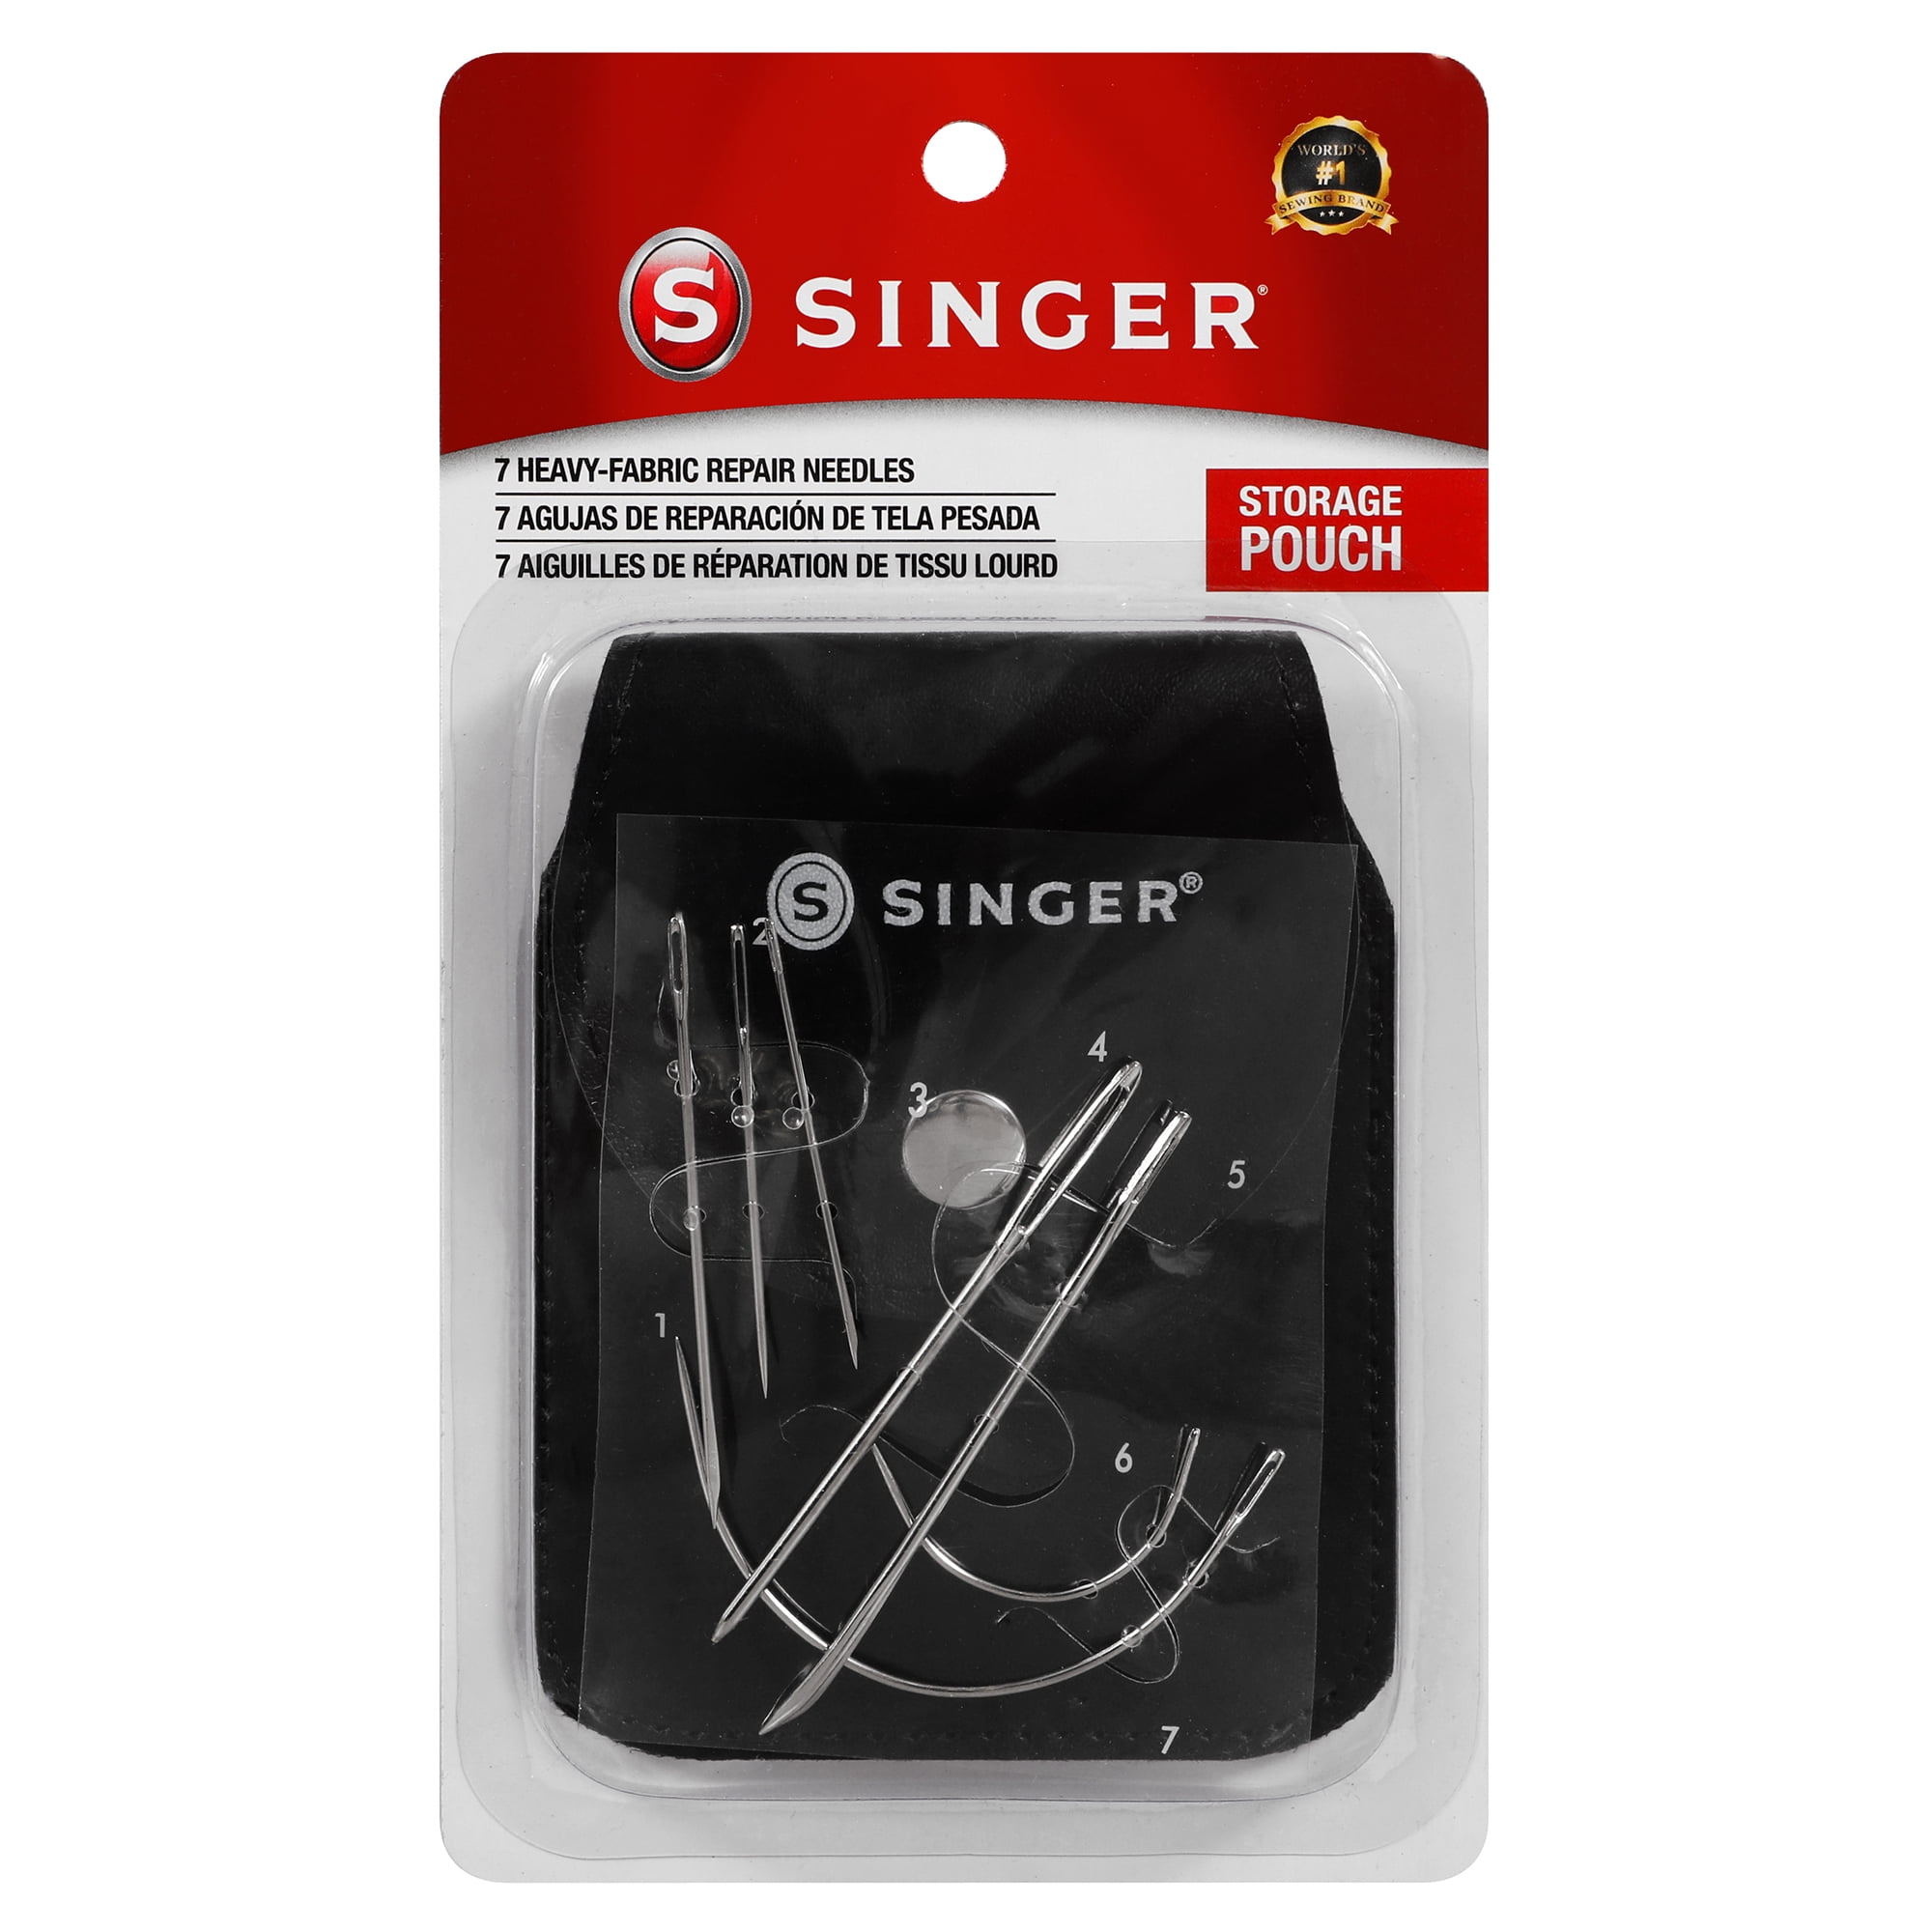 SINGER Heavy Fabric Repair Steel Hand-Sewing Needles with Storage Pouch, 7  Count